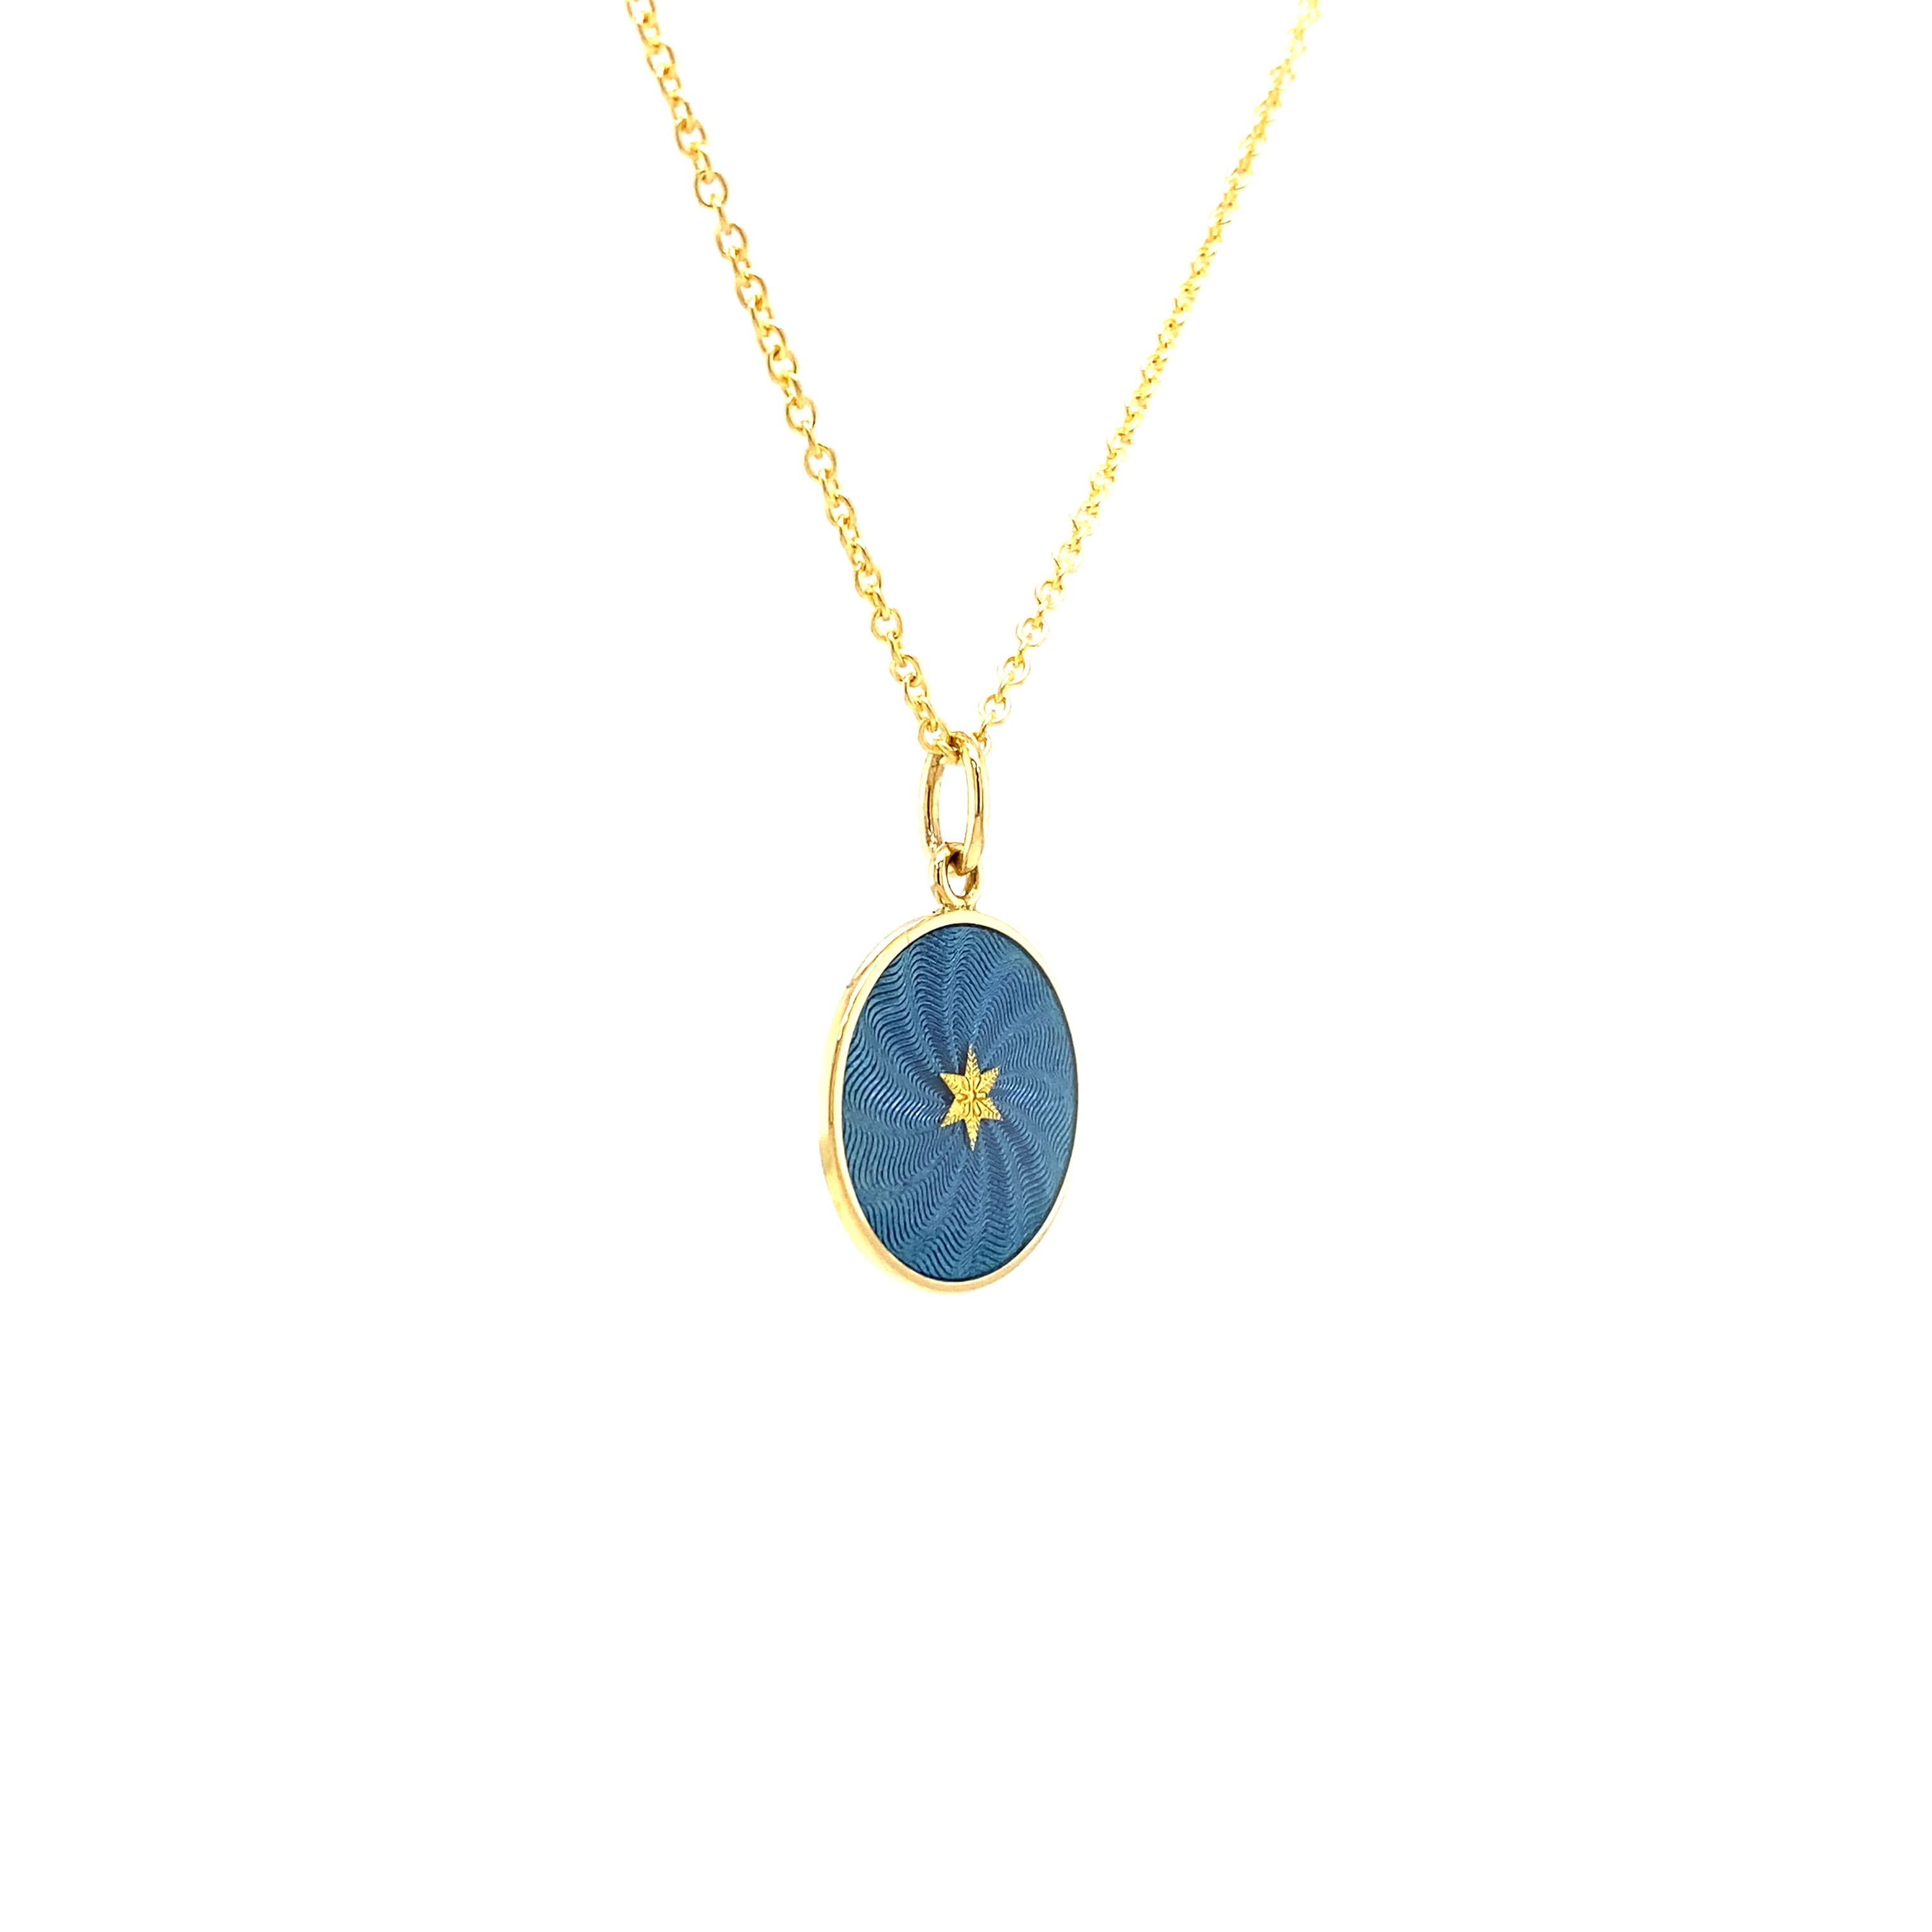 Round Pendant Necklace 18k Yellow Gold Blue Enamel Giulloche Paillons For Sale 1